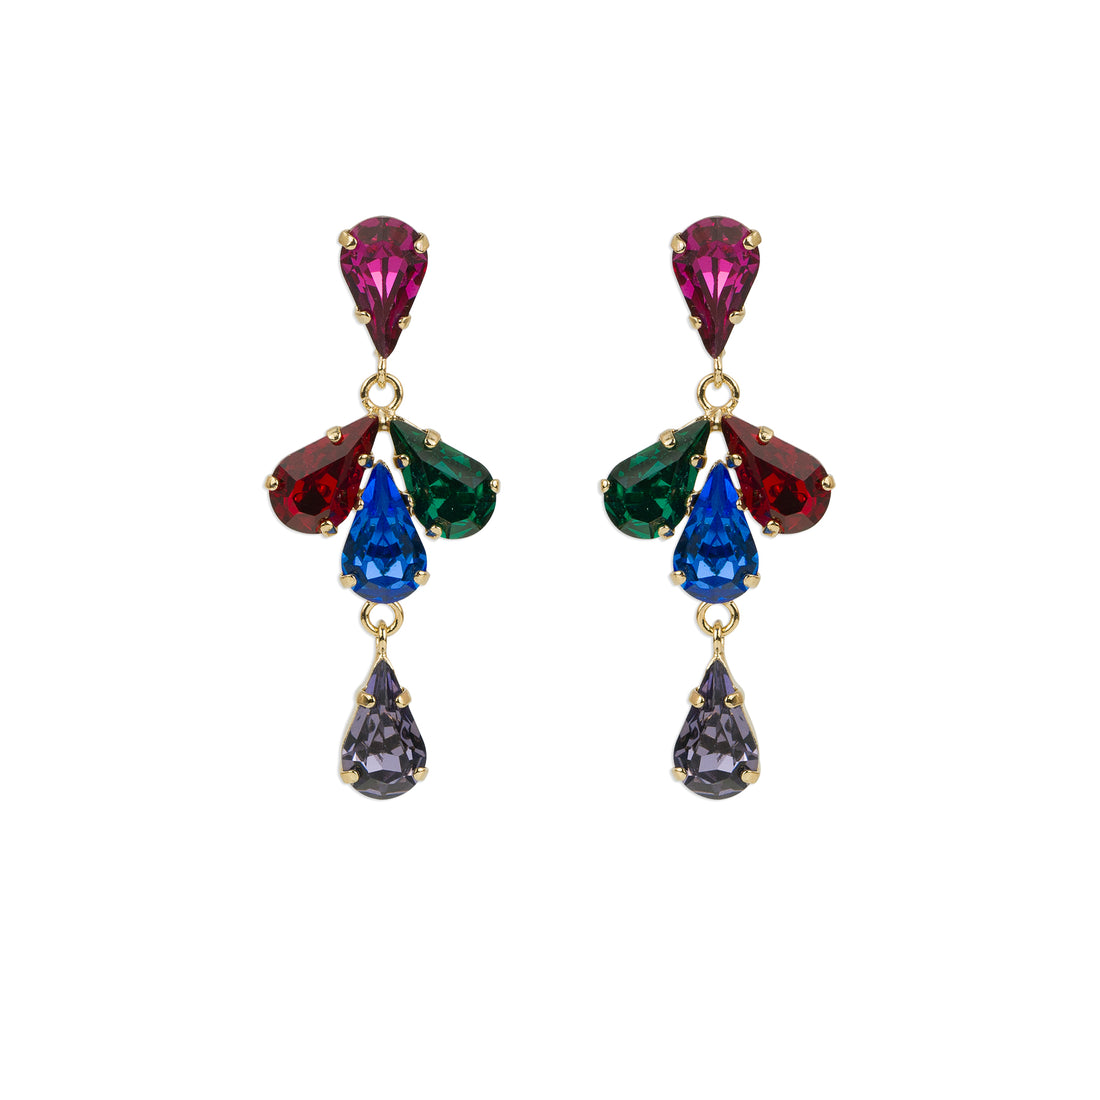 Drop earrings with Swarovski crystals